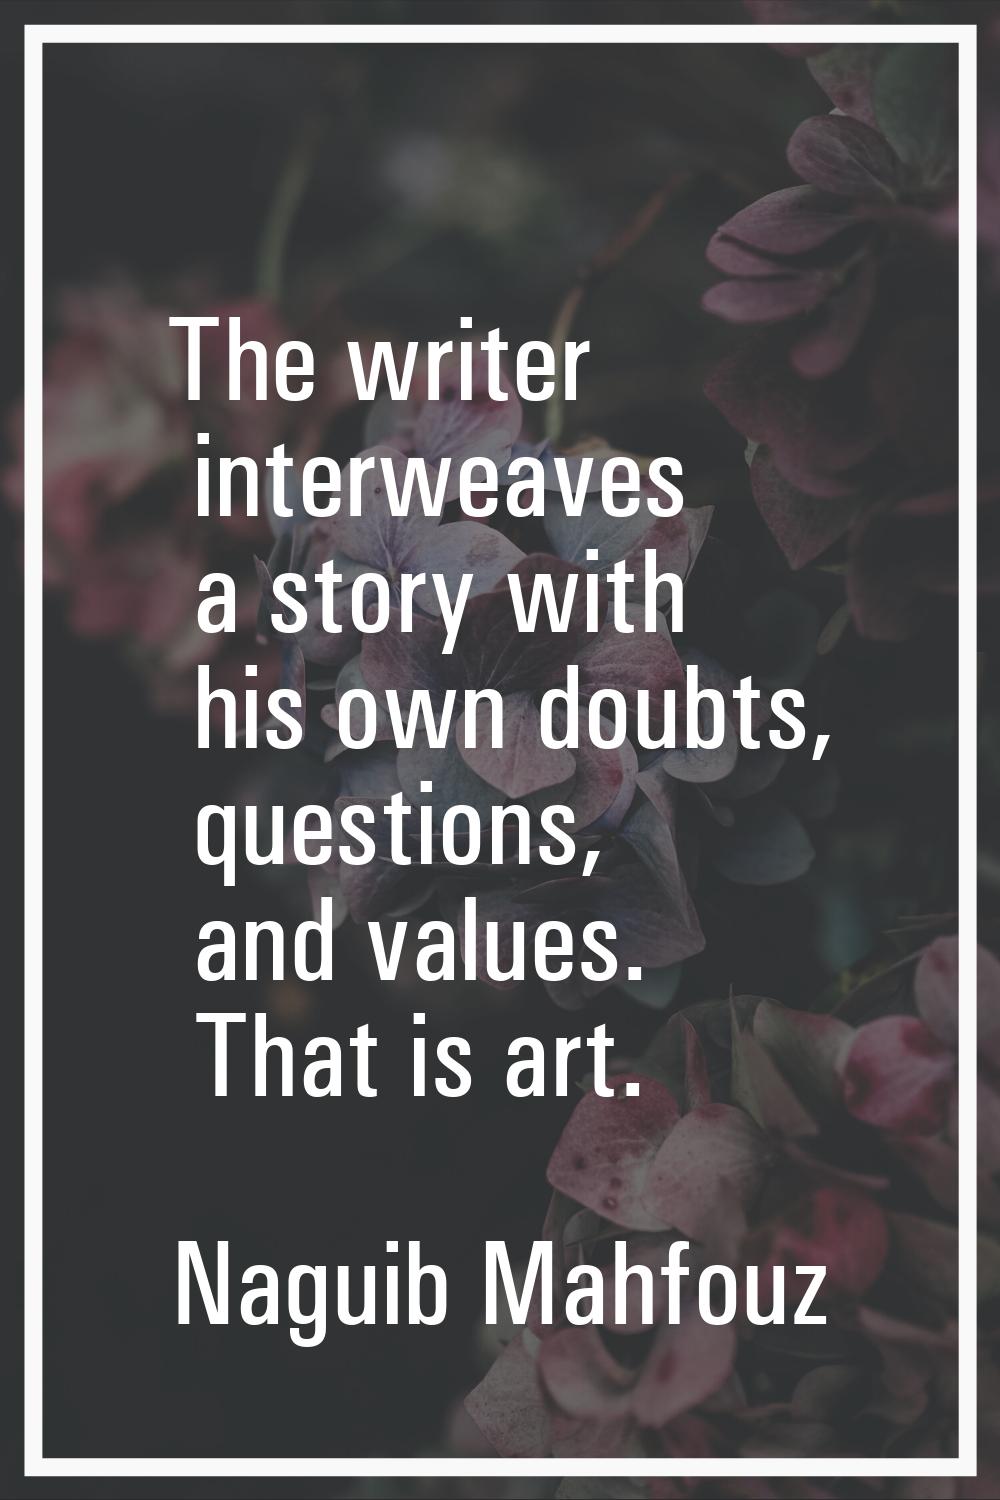 The writer interweaves a story with his own doubts, questions, and values. That is art.